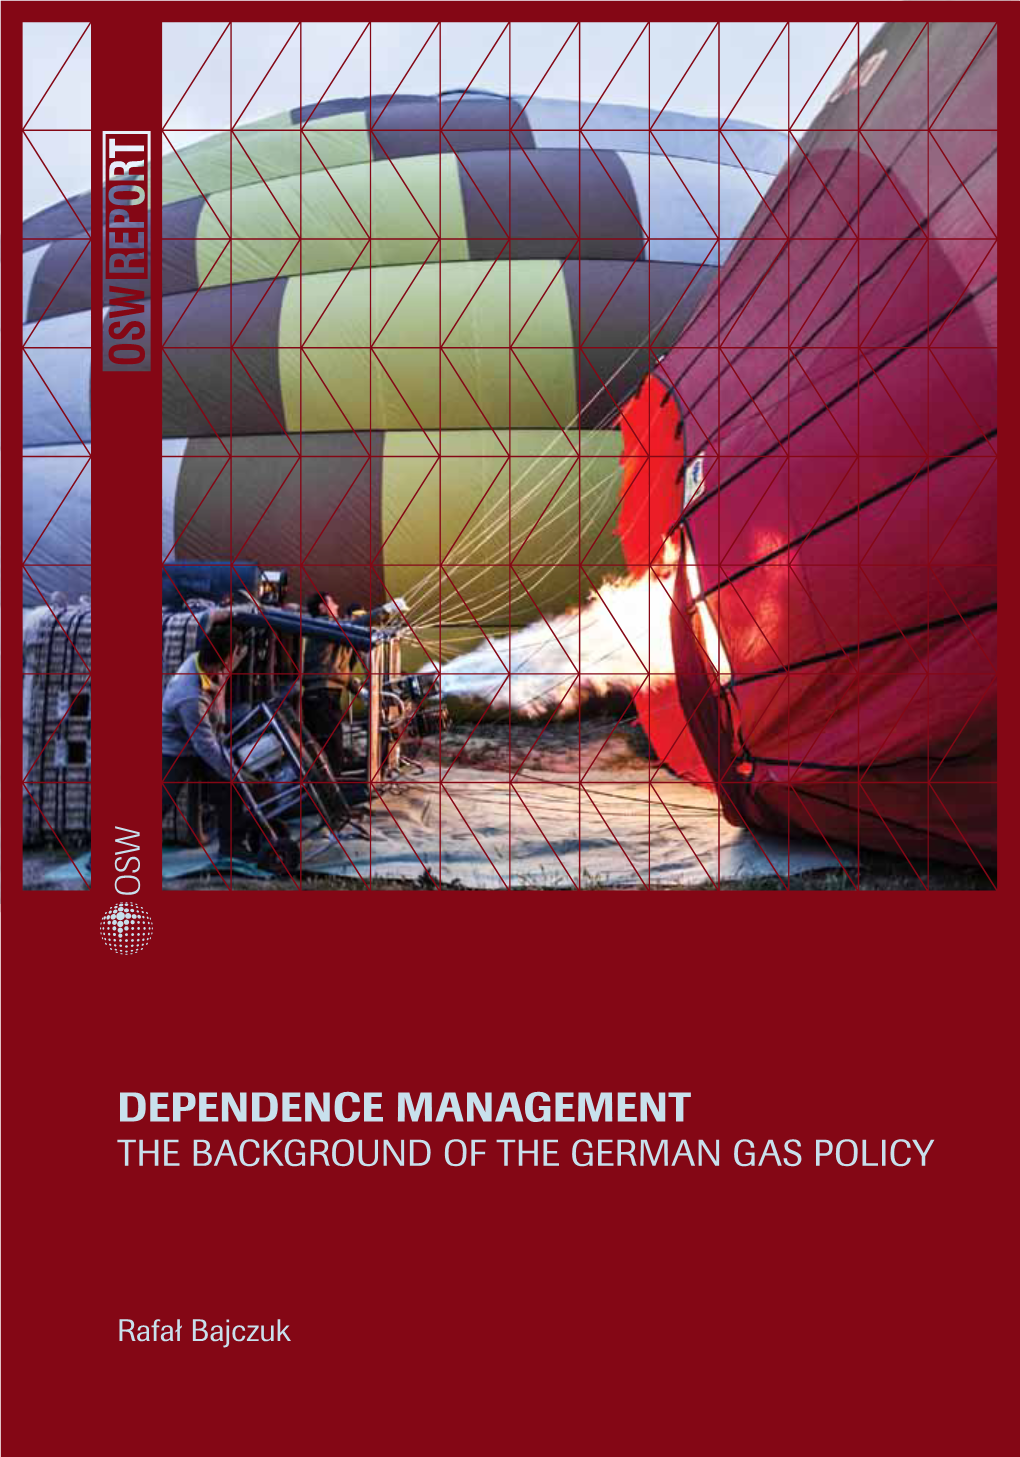 Dependence Management the Background of the German Gas Policy